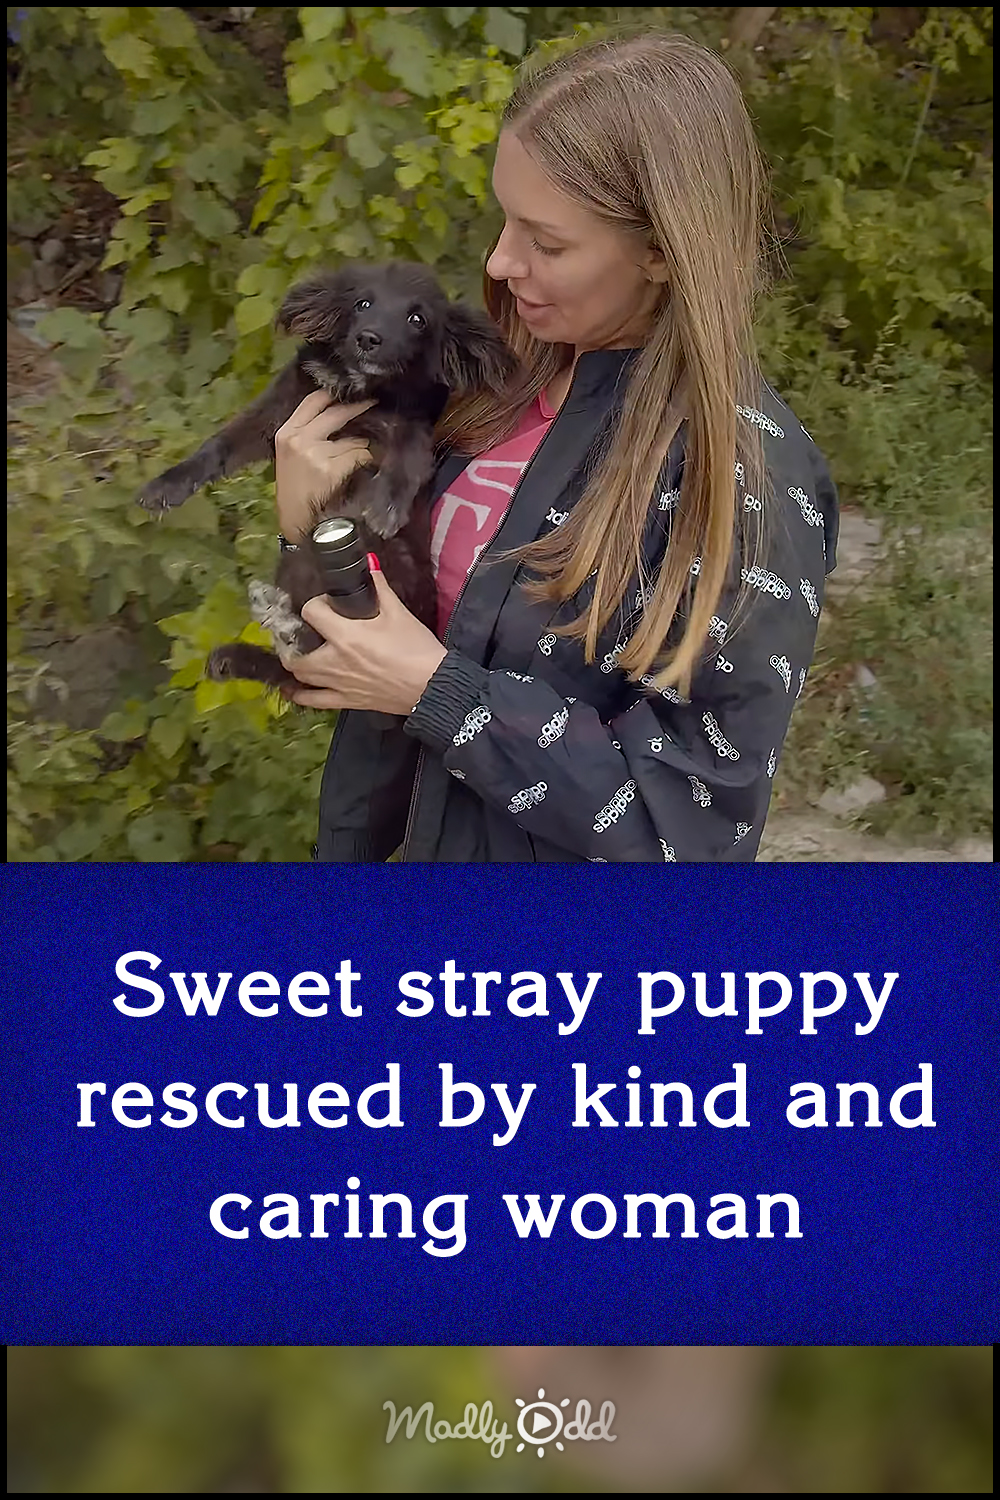 Sweet stray puppy rescued by kind and caring woman